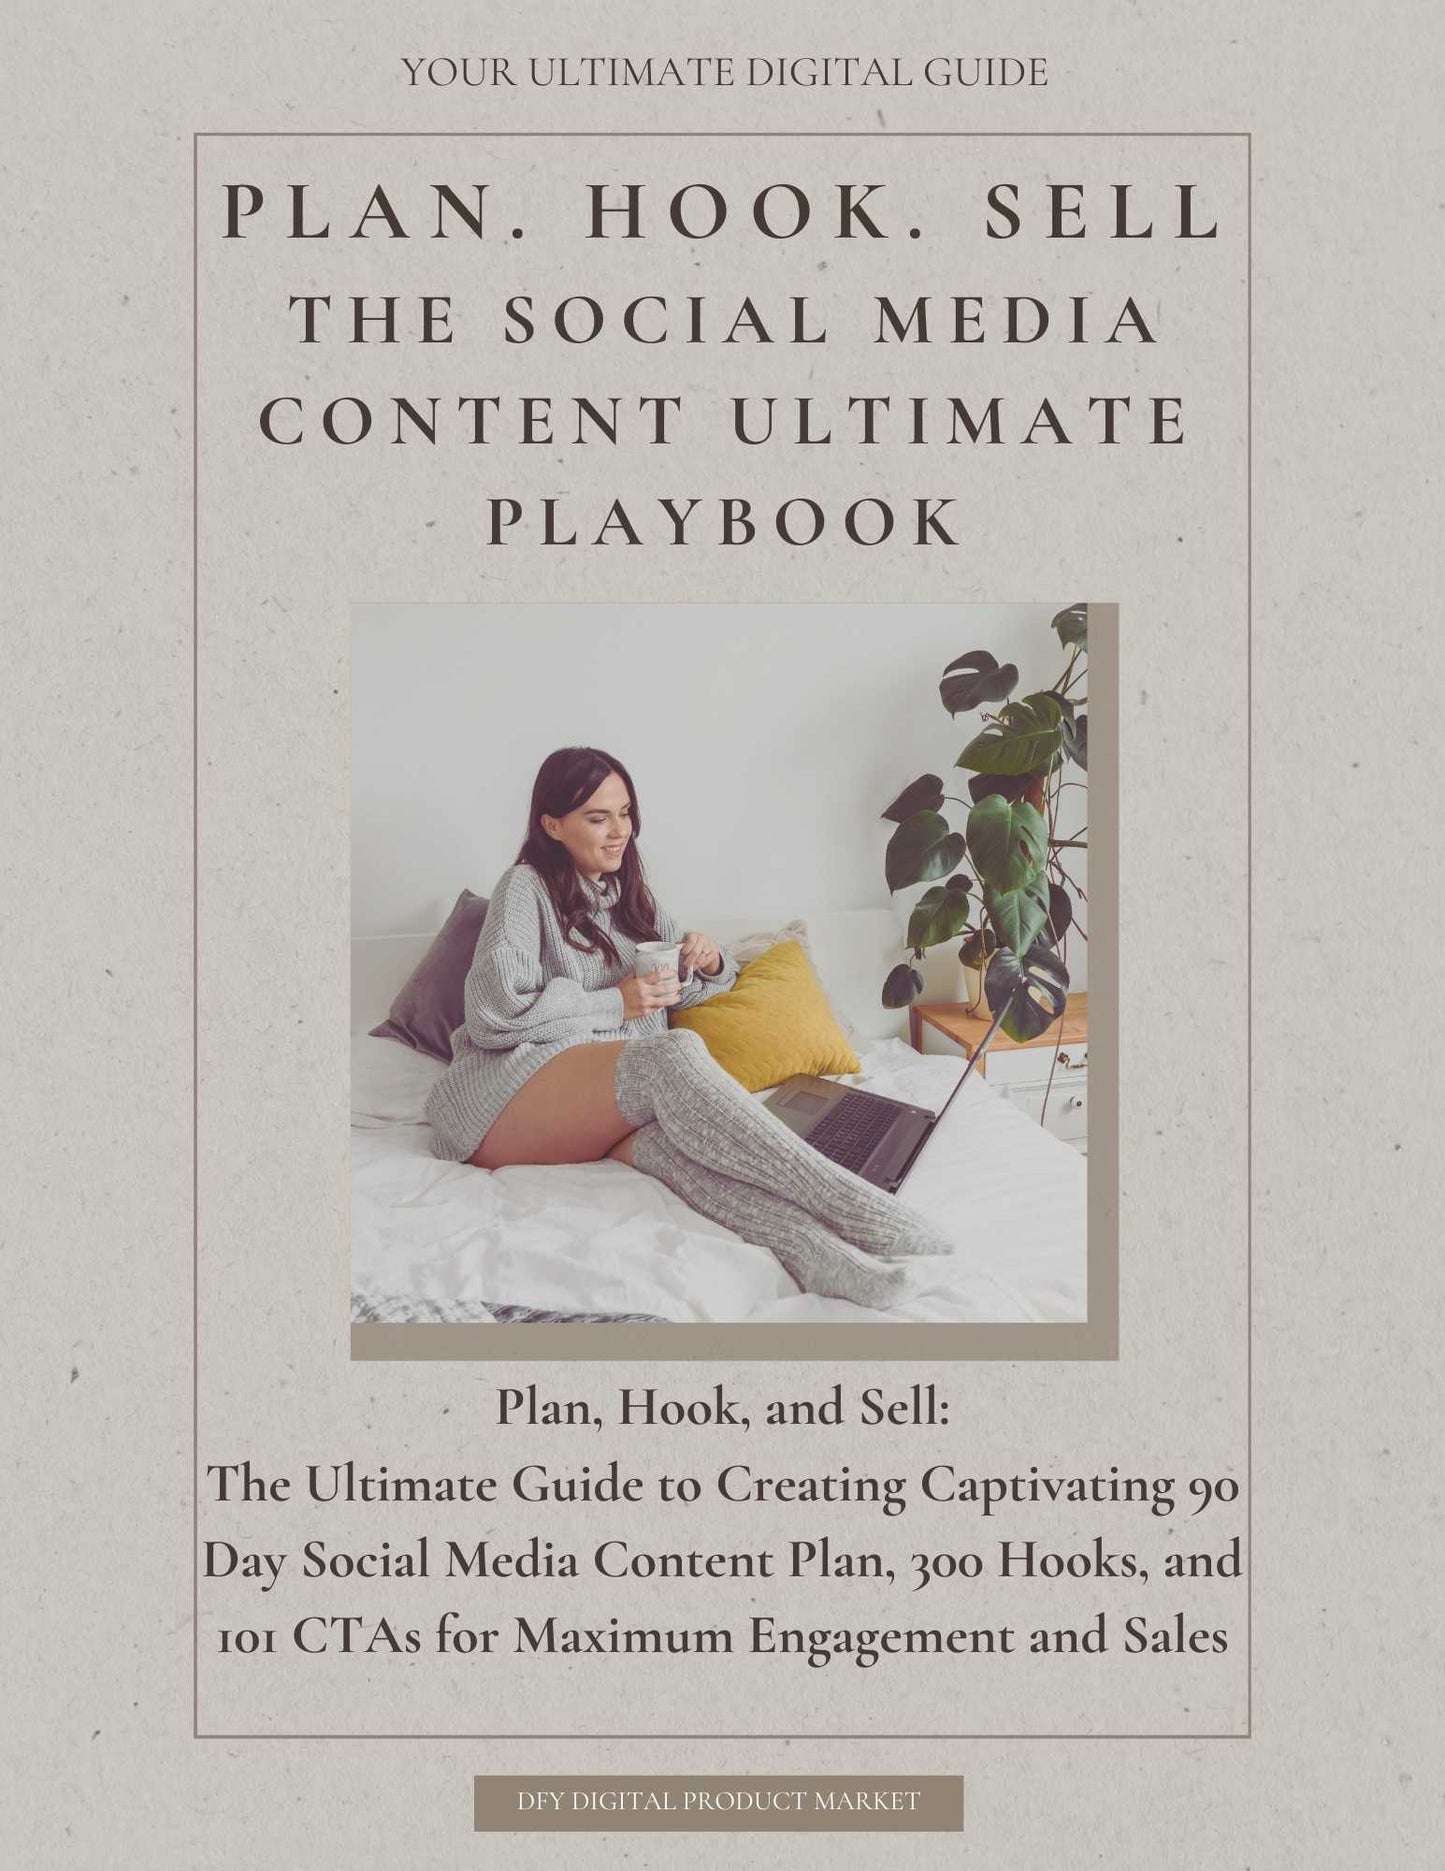 Plan.Hook.Sell The Ultimate Social Media Content Playbook with PLR/MRR Ebook